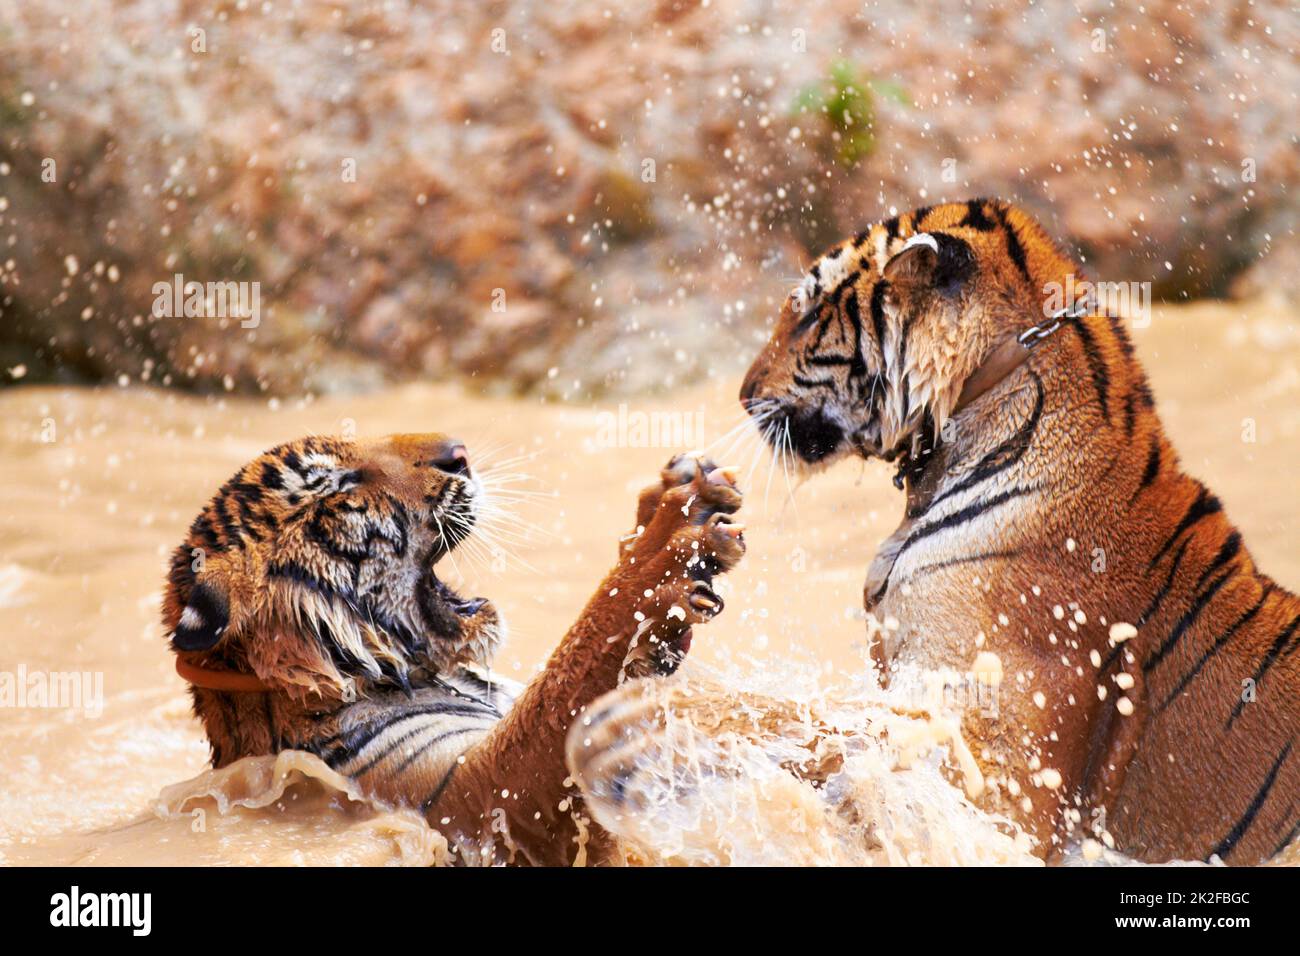 Tiger watersports. Tigers playfully fighting in the water. Stock Photo